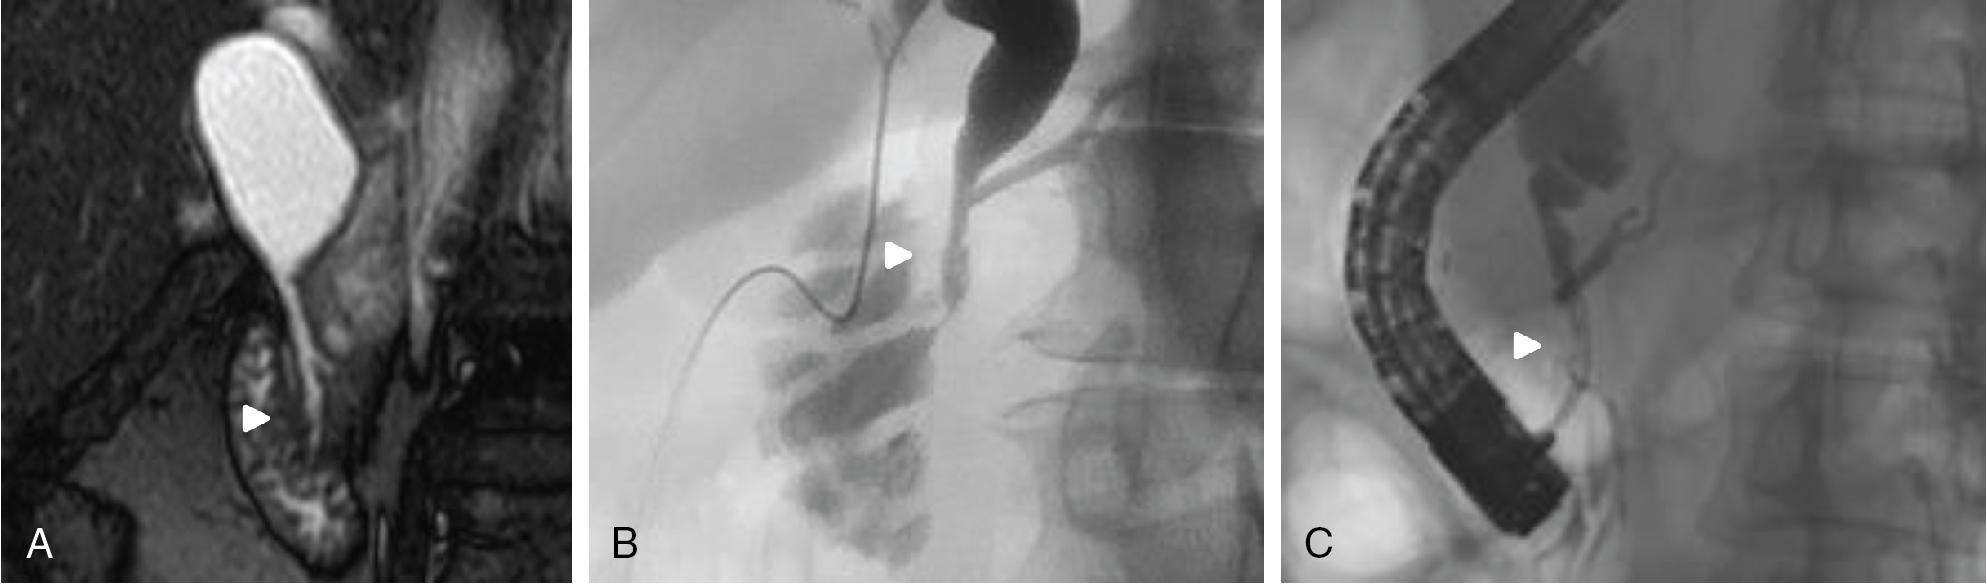 FIGURE 46.4, A long common channel, a characteristic finding in biliary cyst patients, is seen via magnetic resonance imaging (MRI; see Chapter 16 ) (A) and endoscopic retrograde cholangiopancreatography (ERCP; see Chapters 20 and 30 ) (B and C) as marked by the white arrowhead .